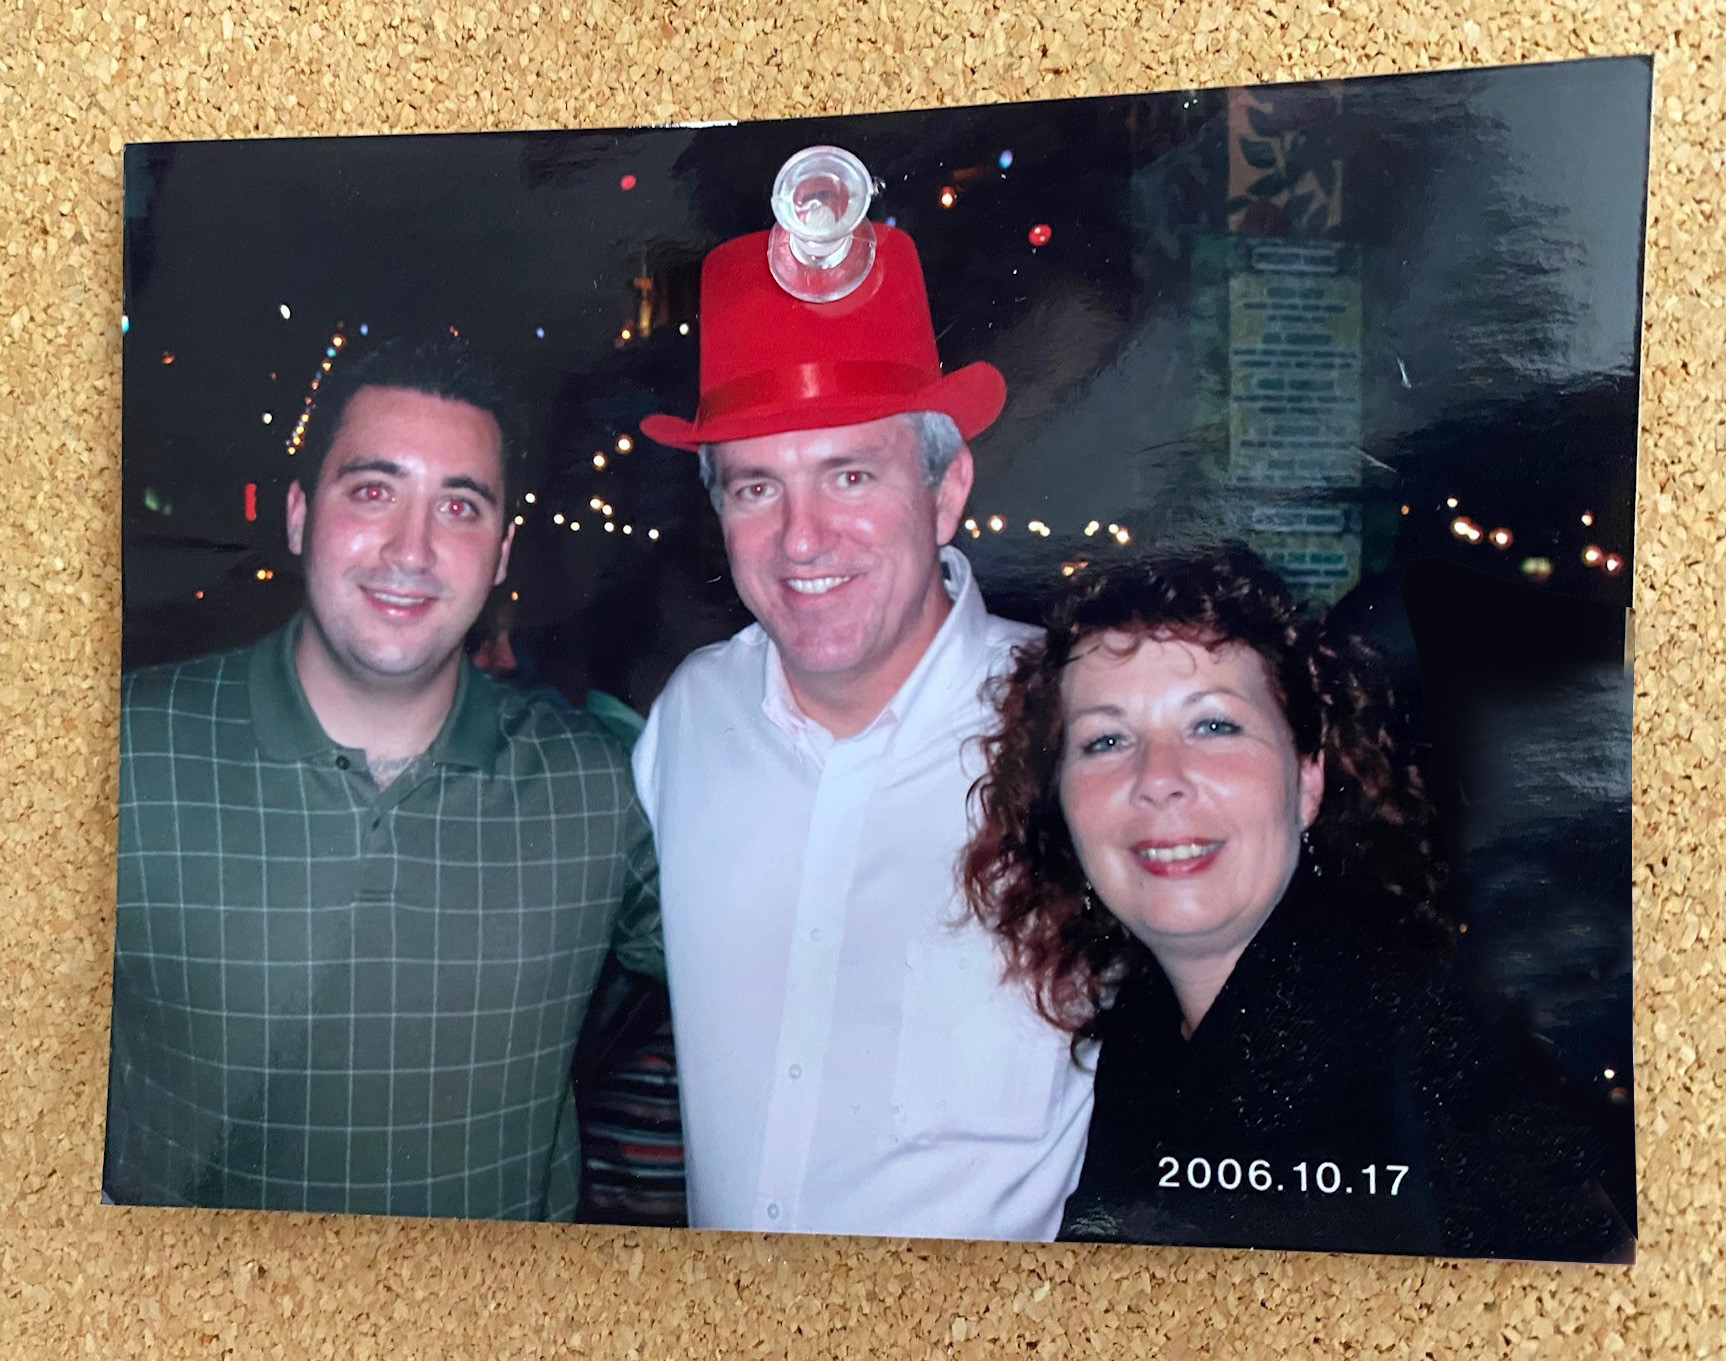 Mike Petrassi with Tom Kallman, CEO and President, and Gerri Cozic, former Vice President, during his first year working at Kallman Worldwide. 